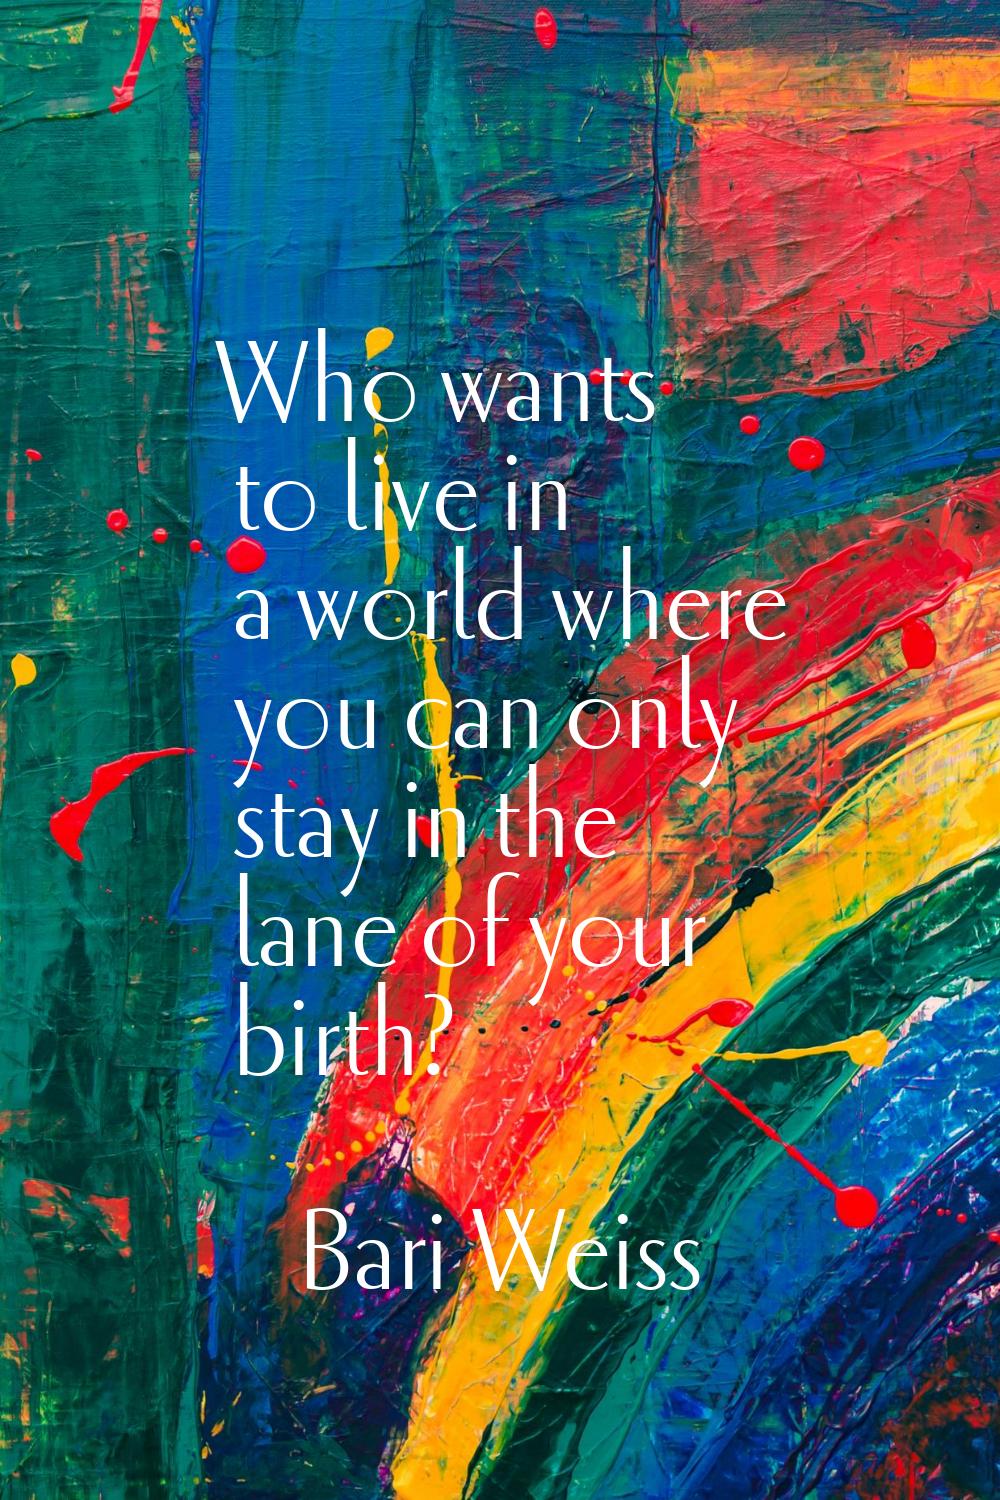 Who wants to live in a world where you can only stay in the lane of your birth?